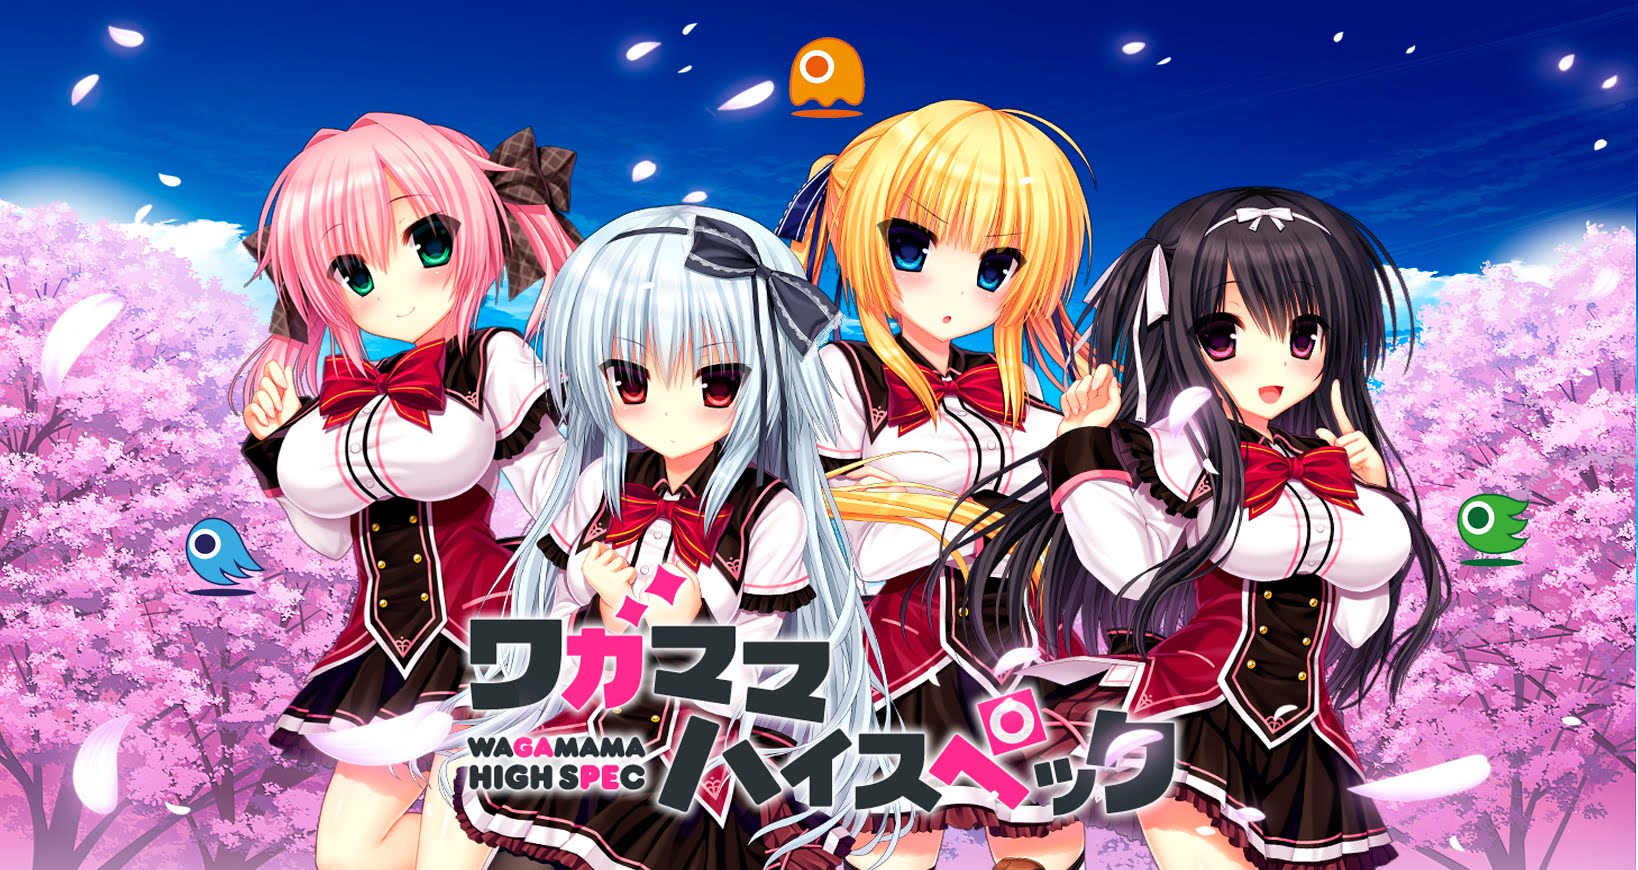 Wagamama High Spec Backgrounds, Compatible - PC, Mobile, Gadgets| 1638x870 px